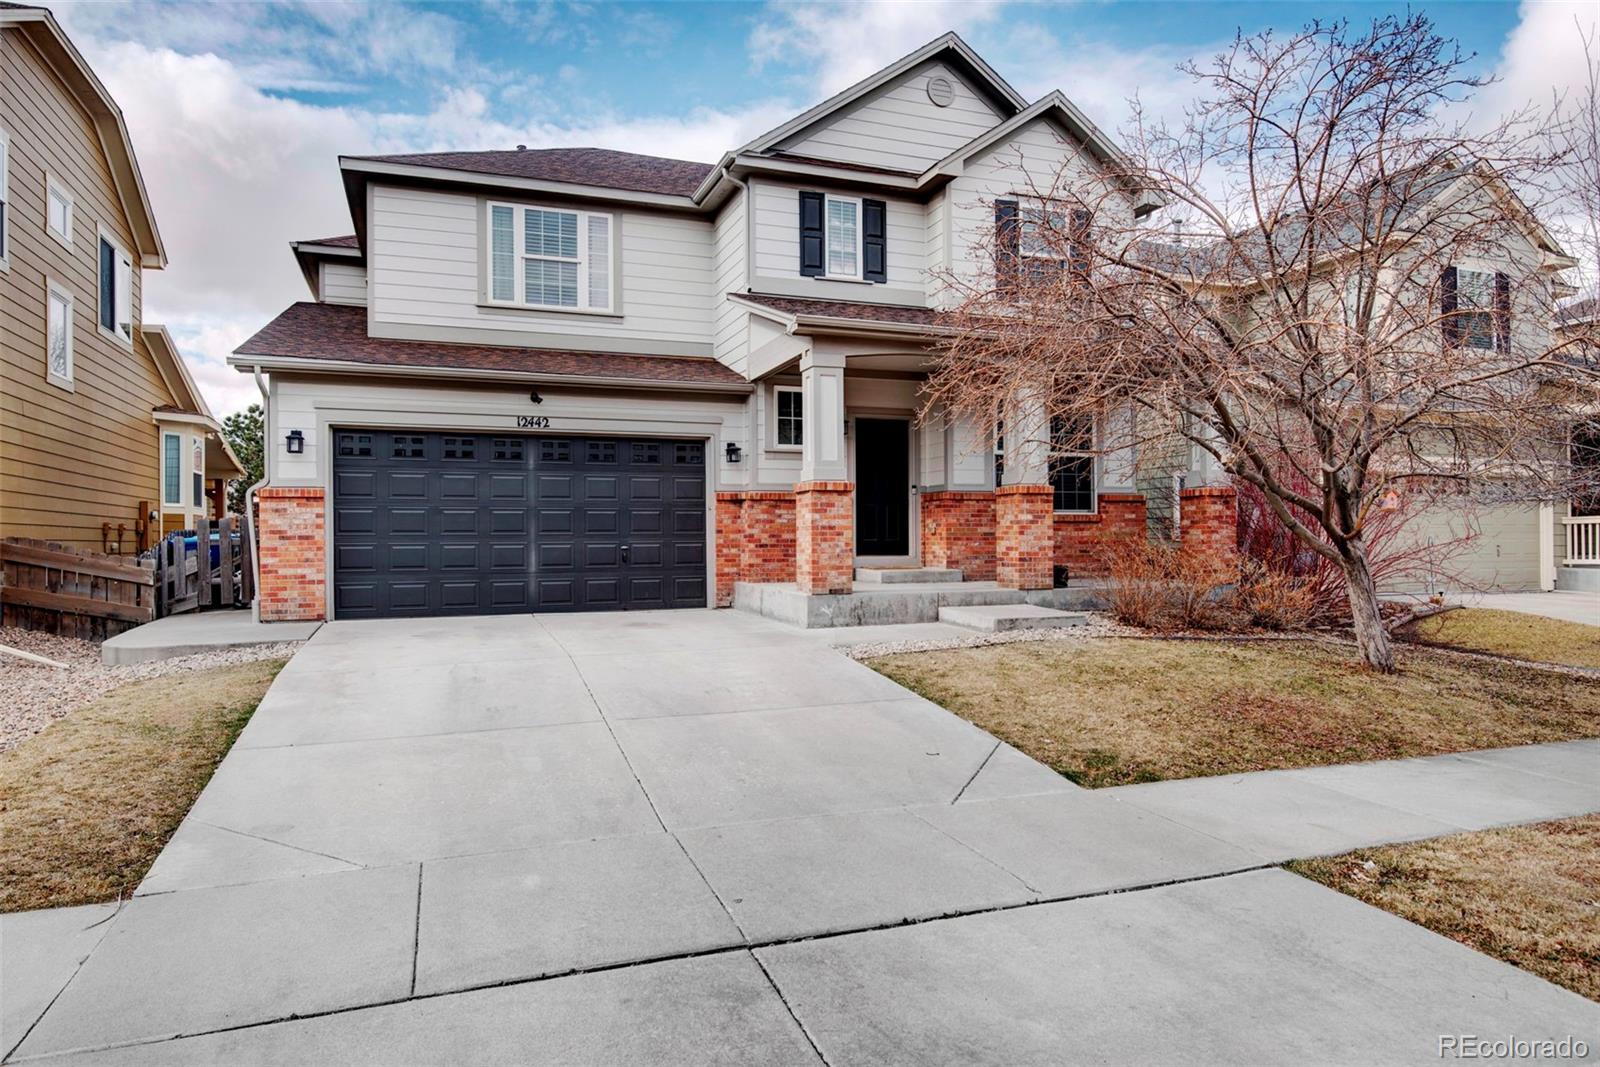 12442 E 106th Place, commerce city MLS: 4609600 Beds: 4 Baths: 4 Price: $595,000